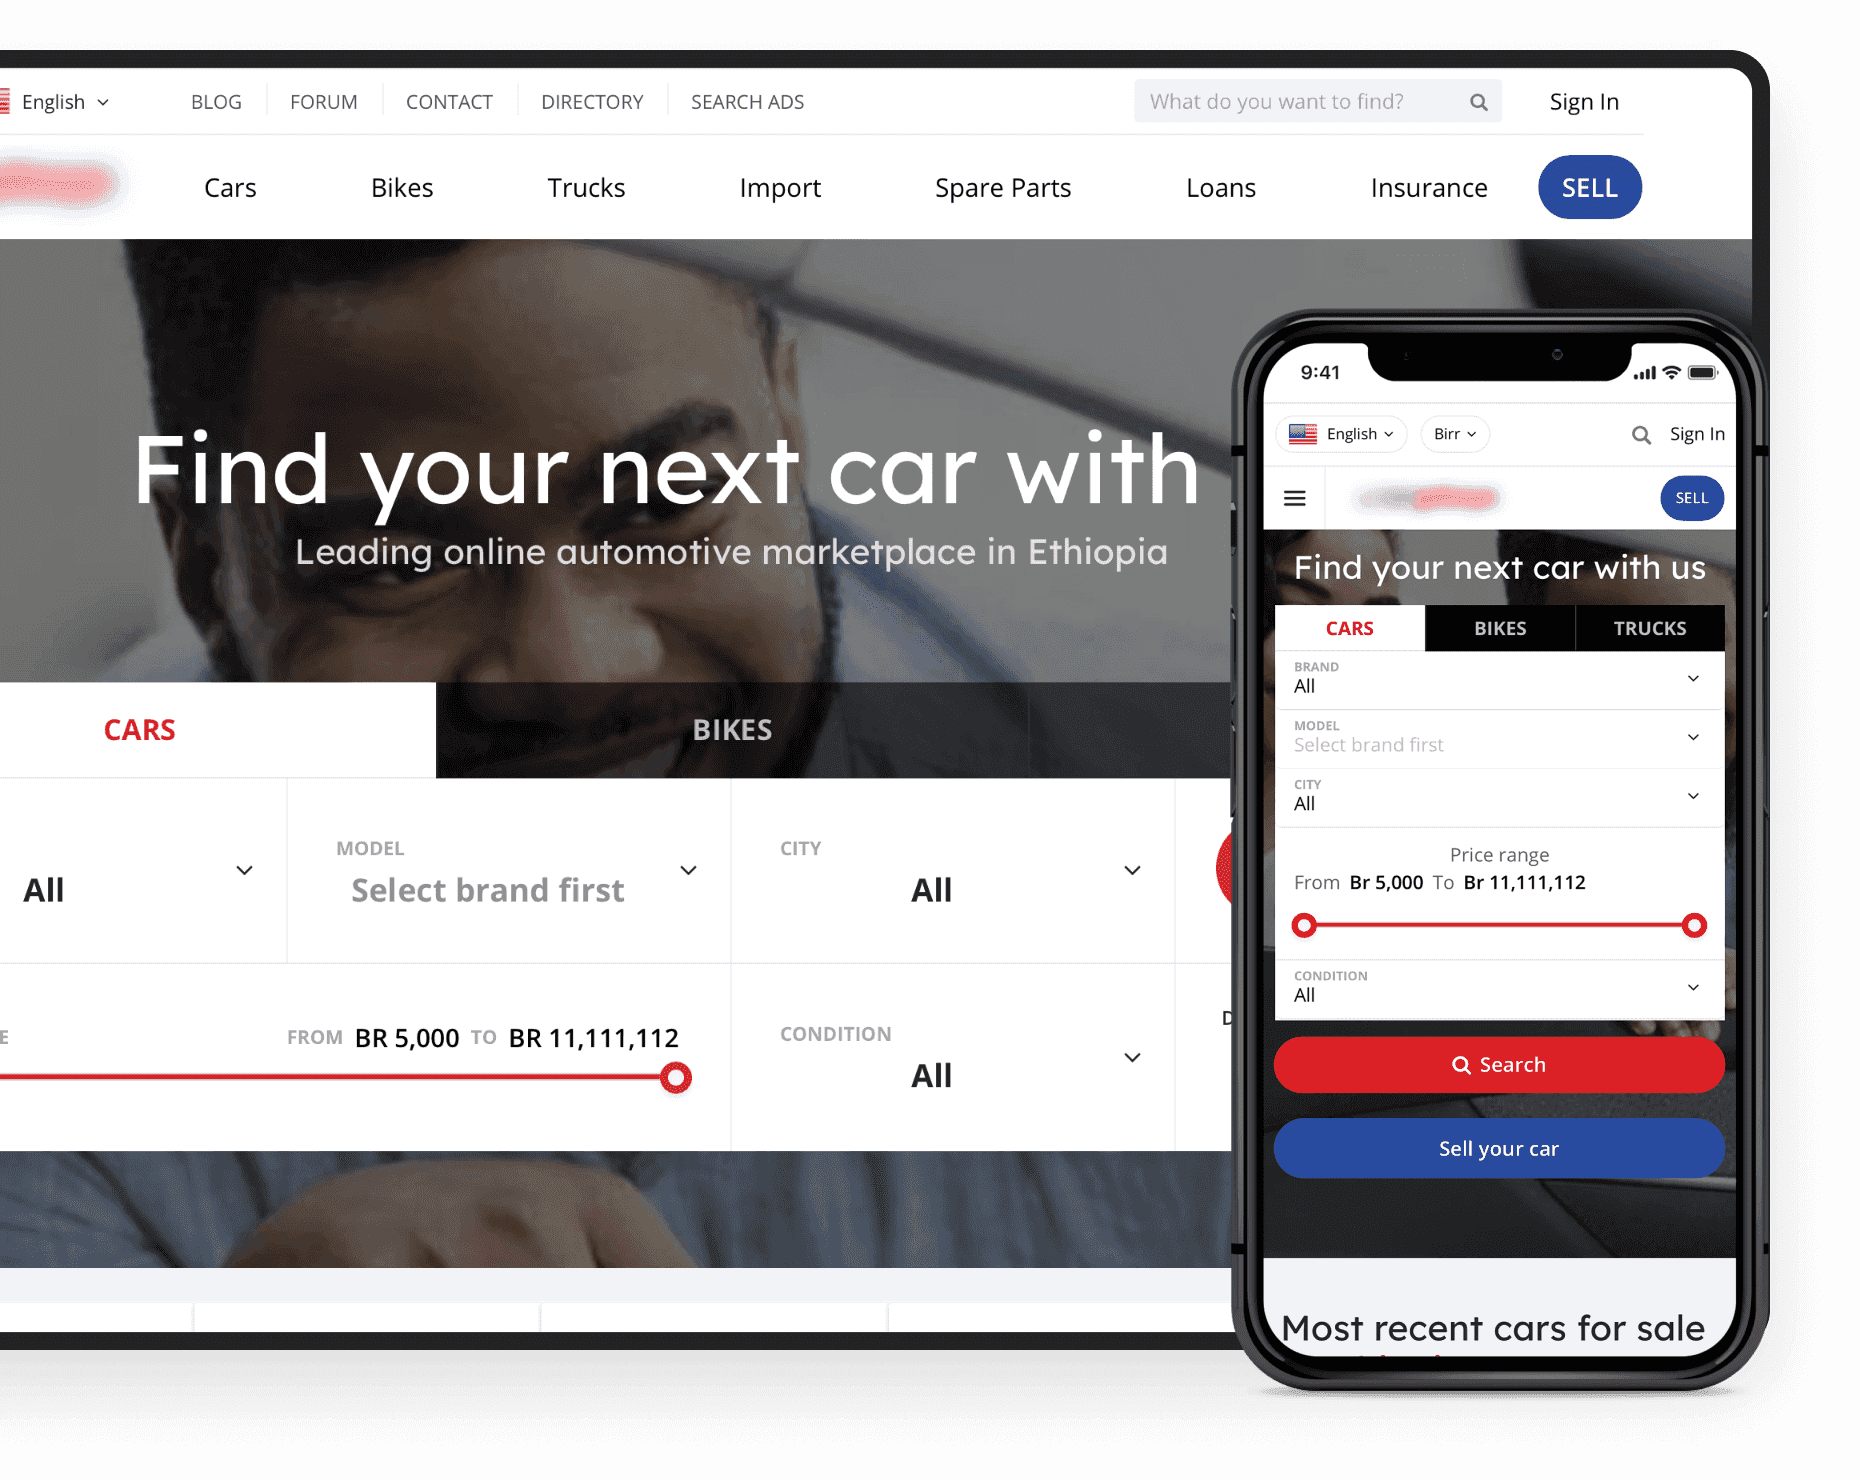 PWA for the car marketplace